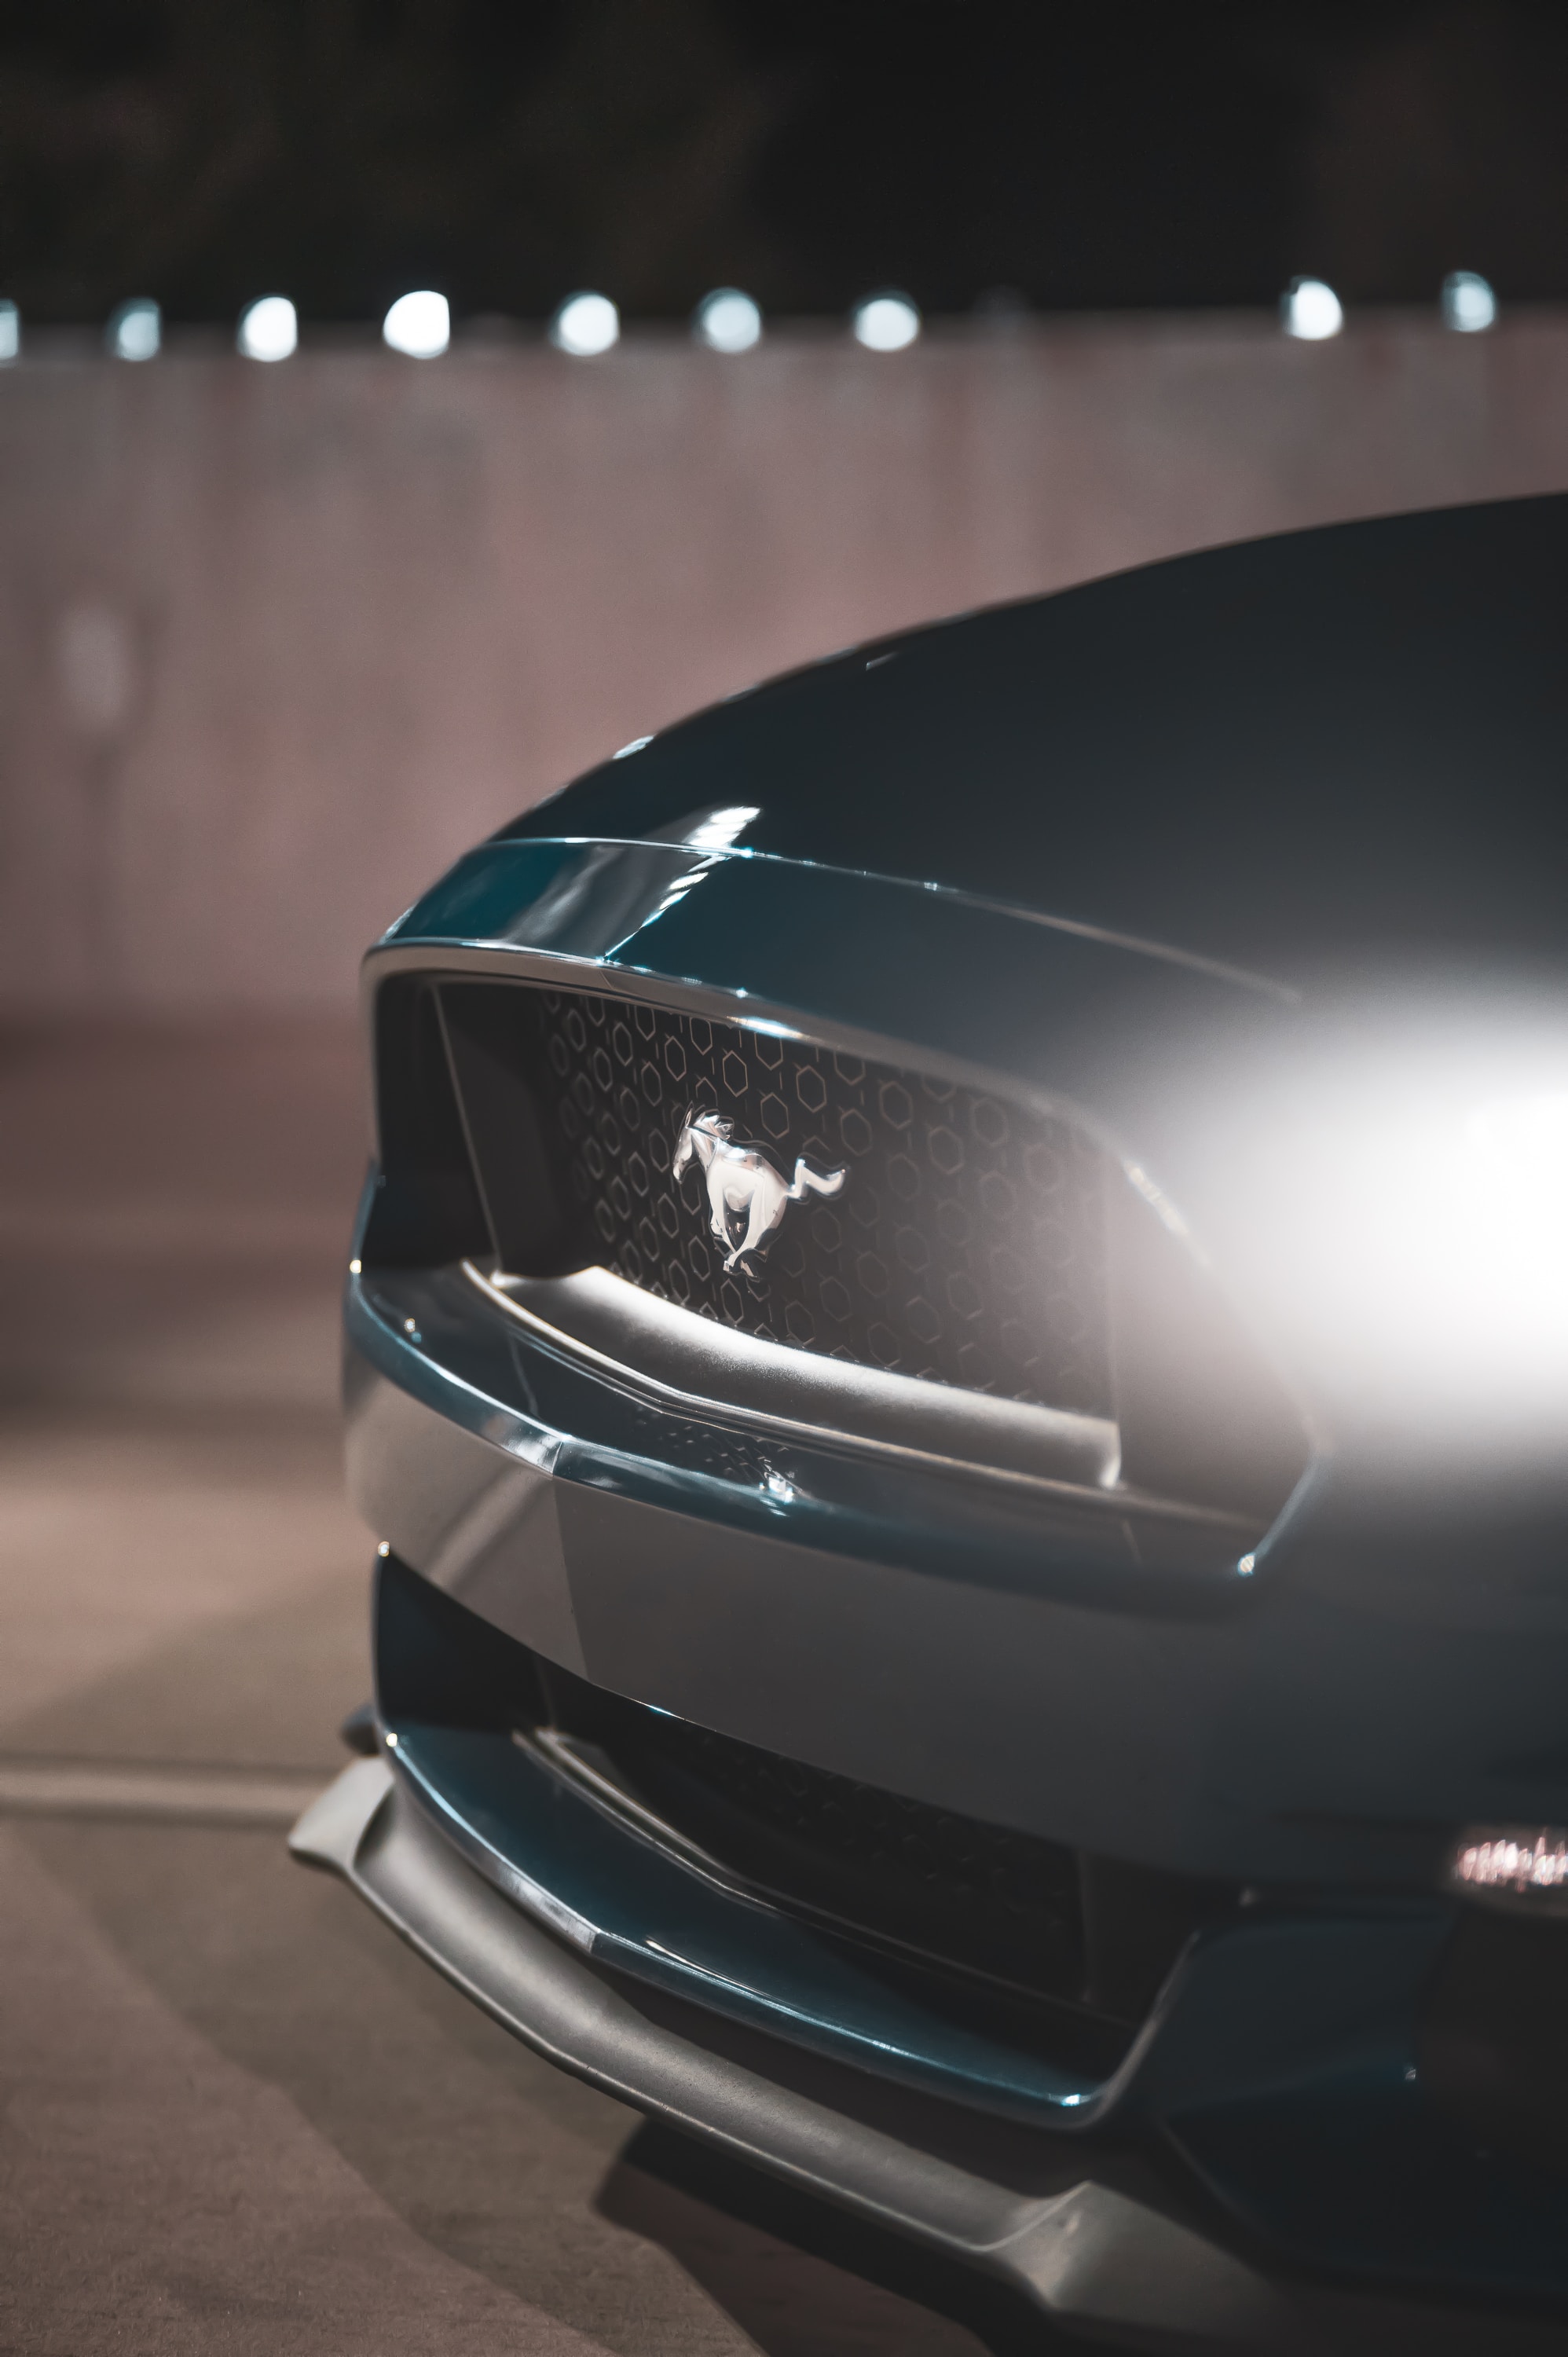 8k Mustang Images